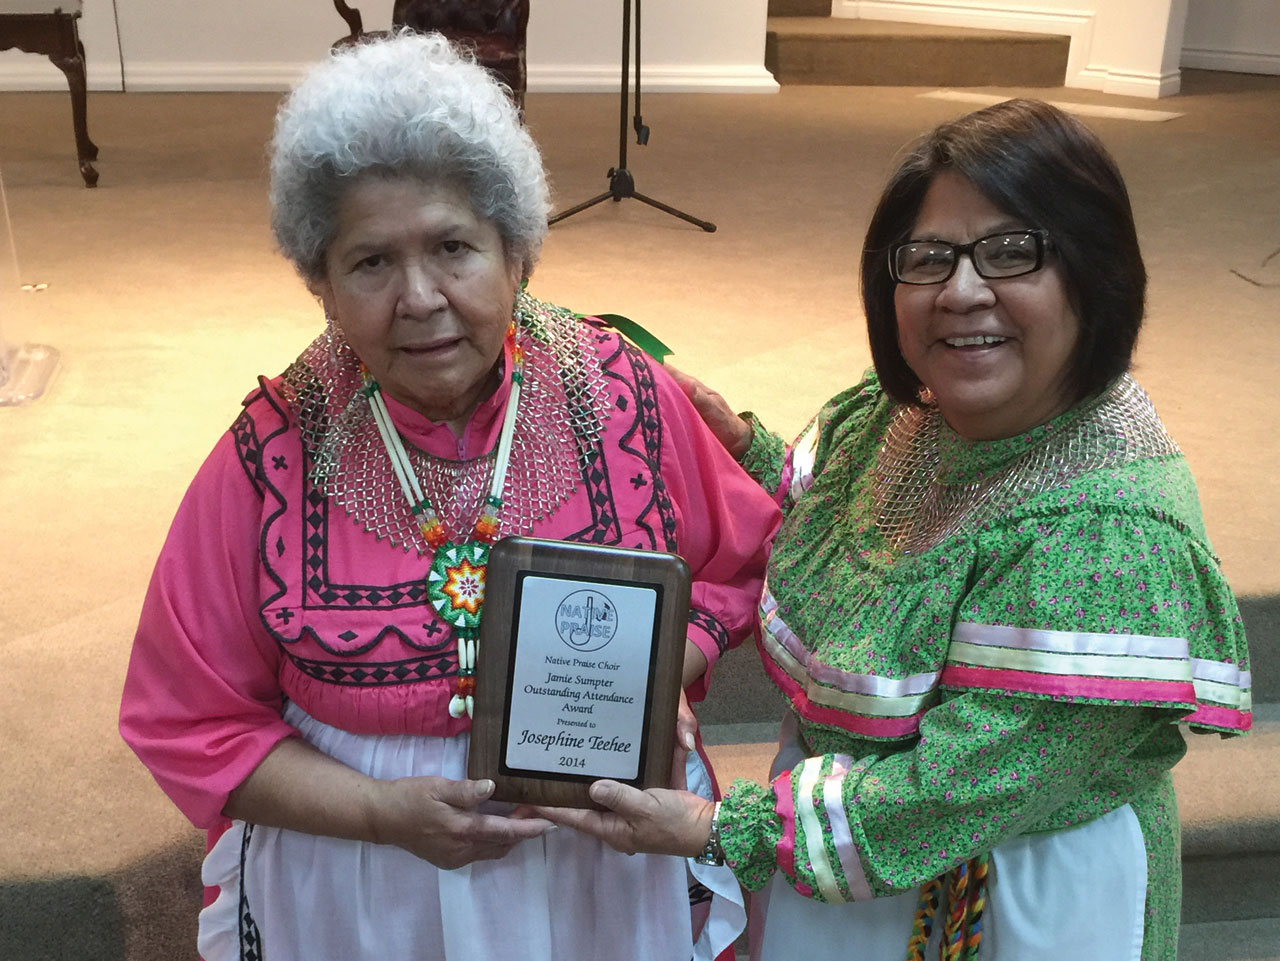 Josephine Teehee, of the Mississippi Choctaw tribe, left, received the inaugural choir award, Jamie Sumpter Outstanding Attendance Award, 2014 from Augusta Smith, Native American LINK executive director & Native Praise Choir coordinator